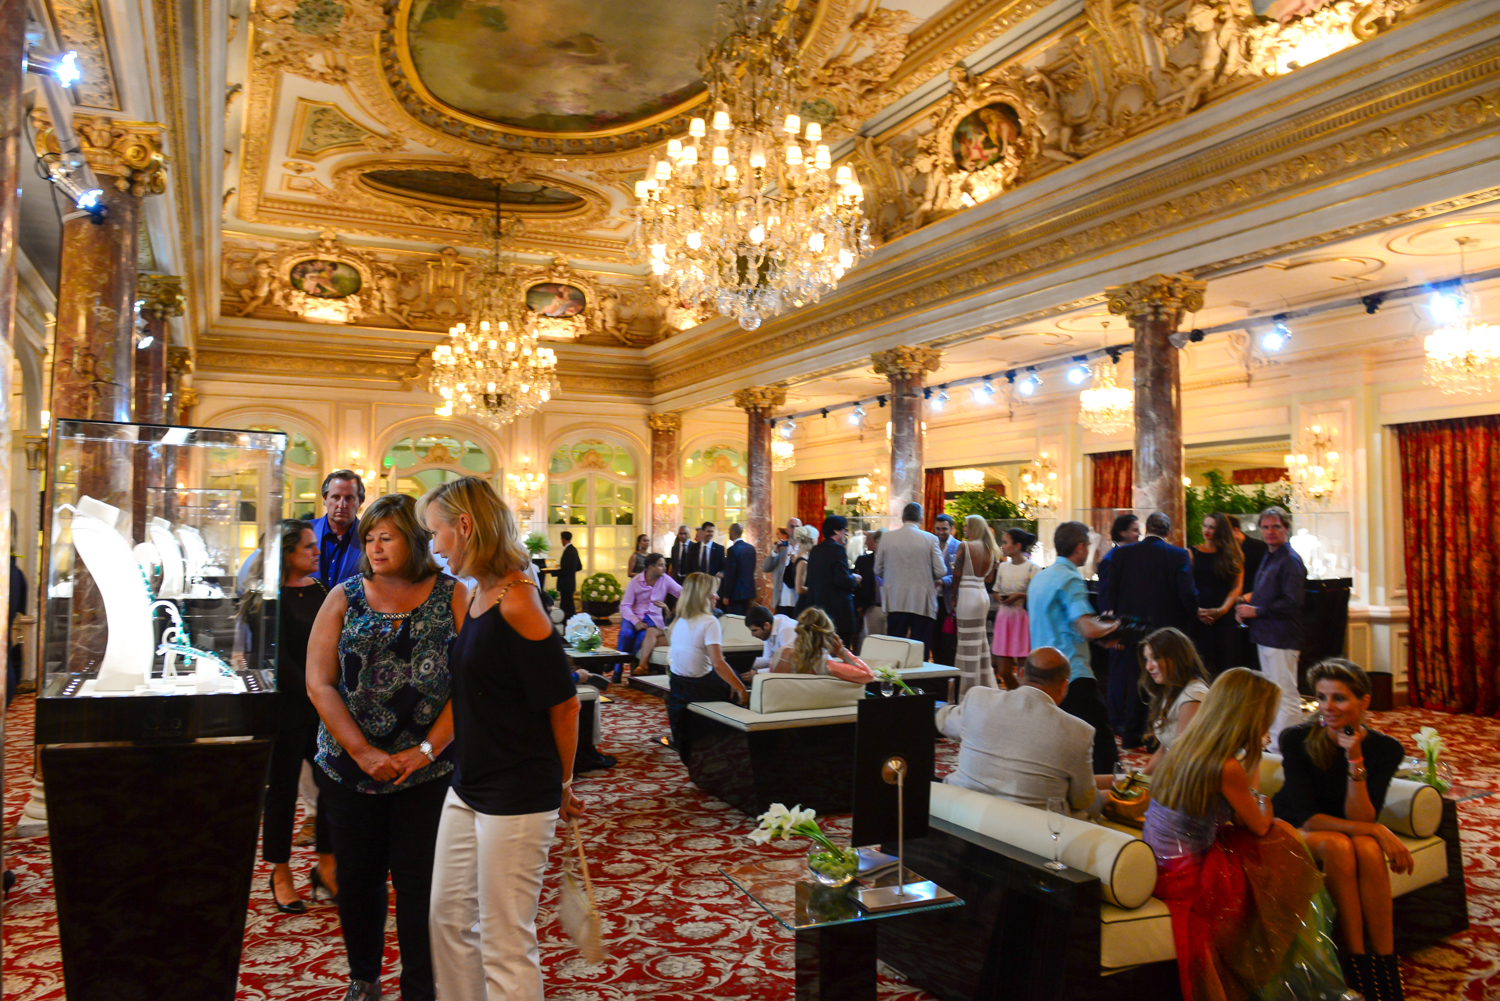 Guests at the Hotel Hermitage Monte Carlo's Jacob & Co. exhibition discover the world-class jeweler's exquisite collections. Image © Stéphane Danna/Realis, courtesy of Jacob & Co.